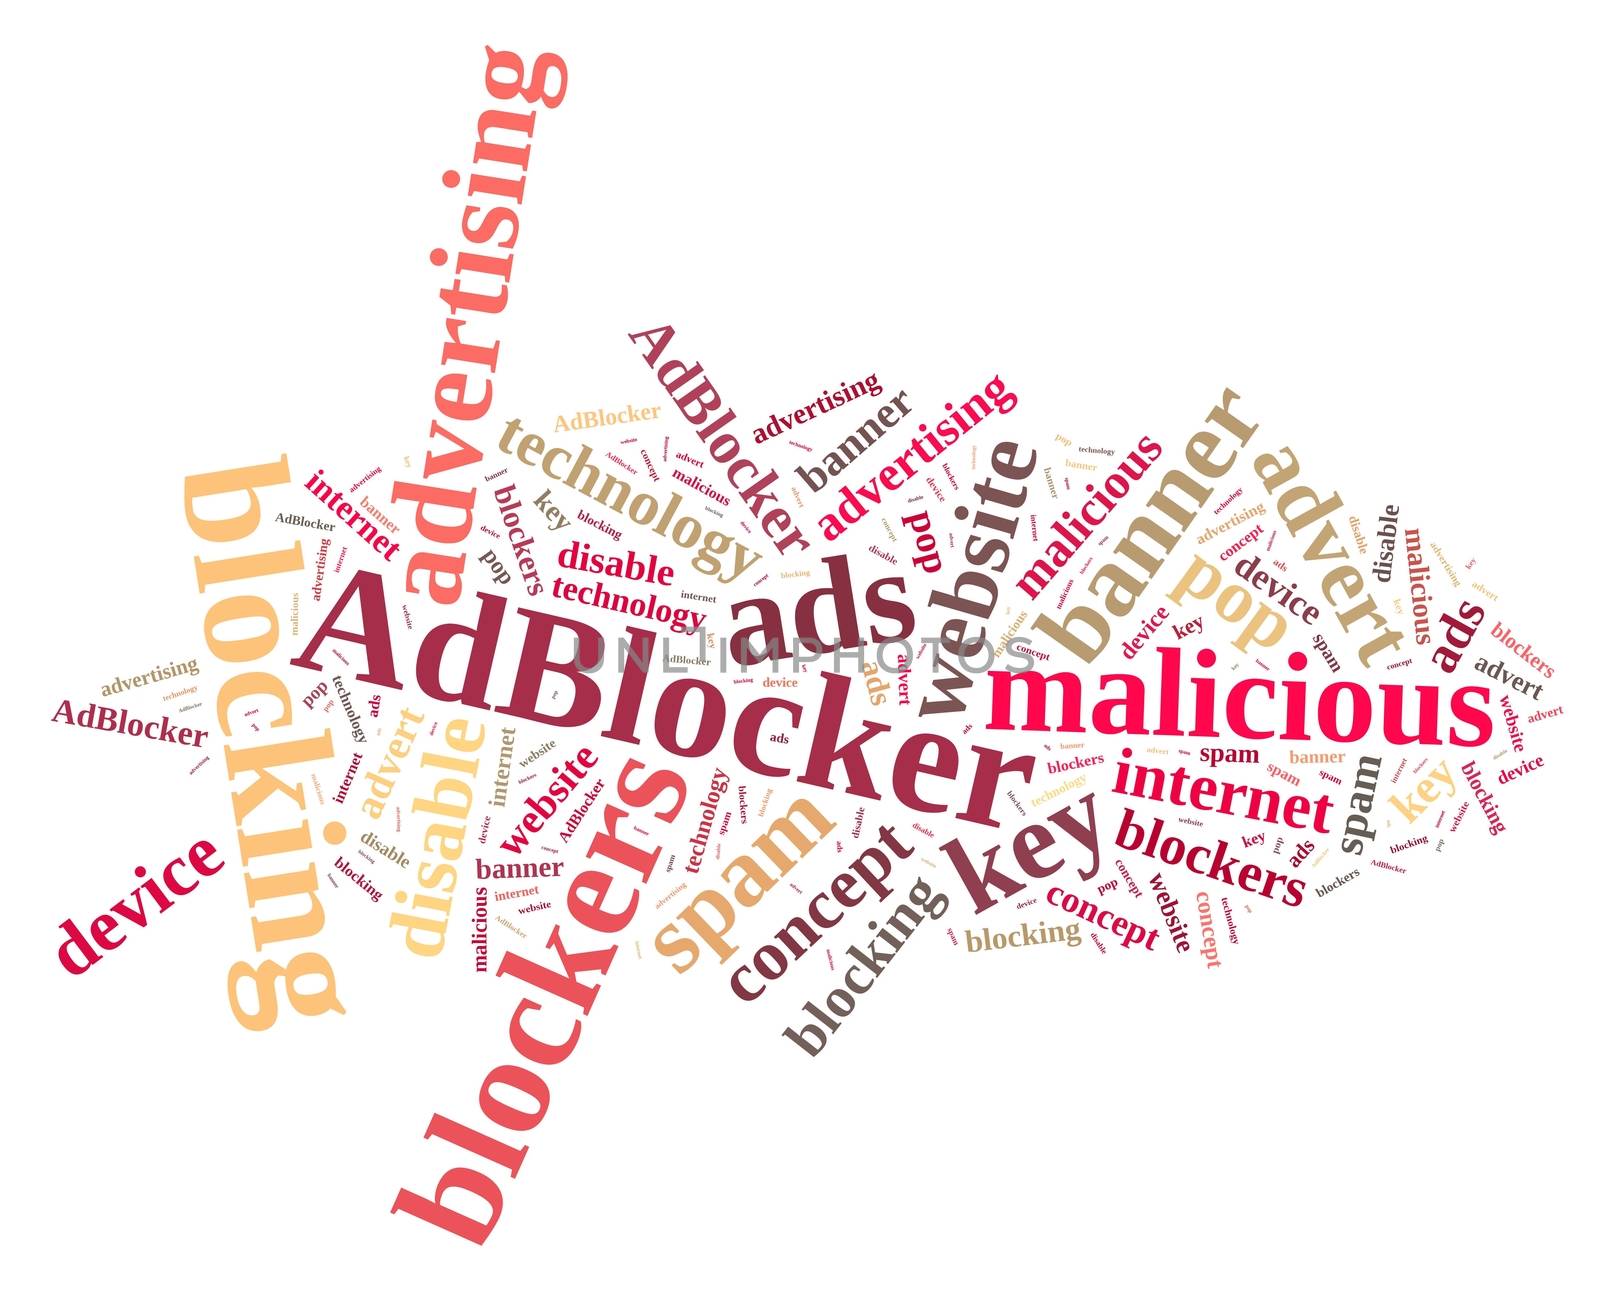 Illustration with word cloud on ad blockers.